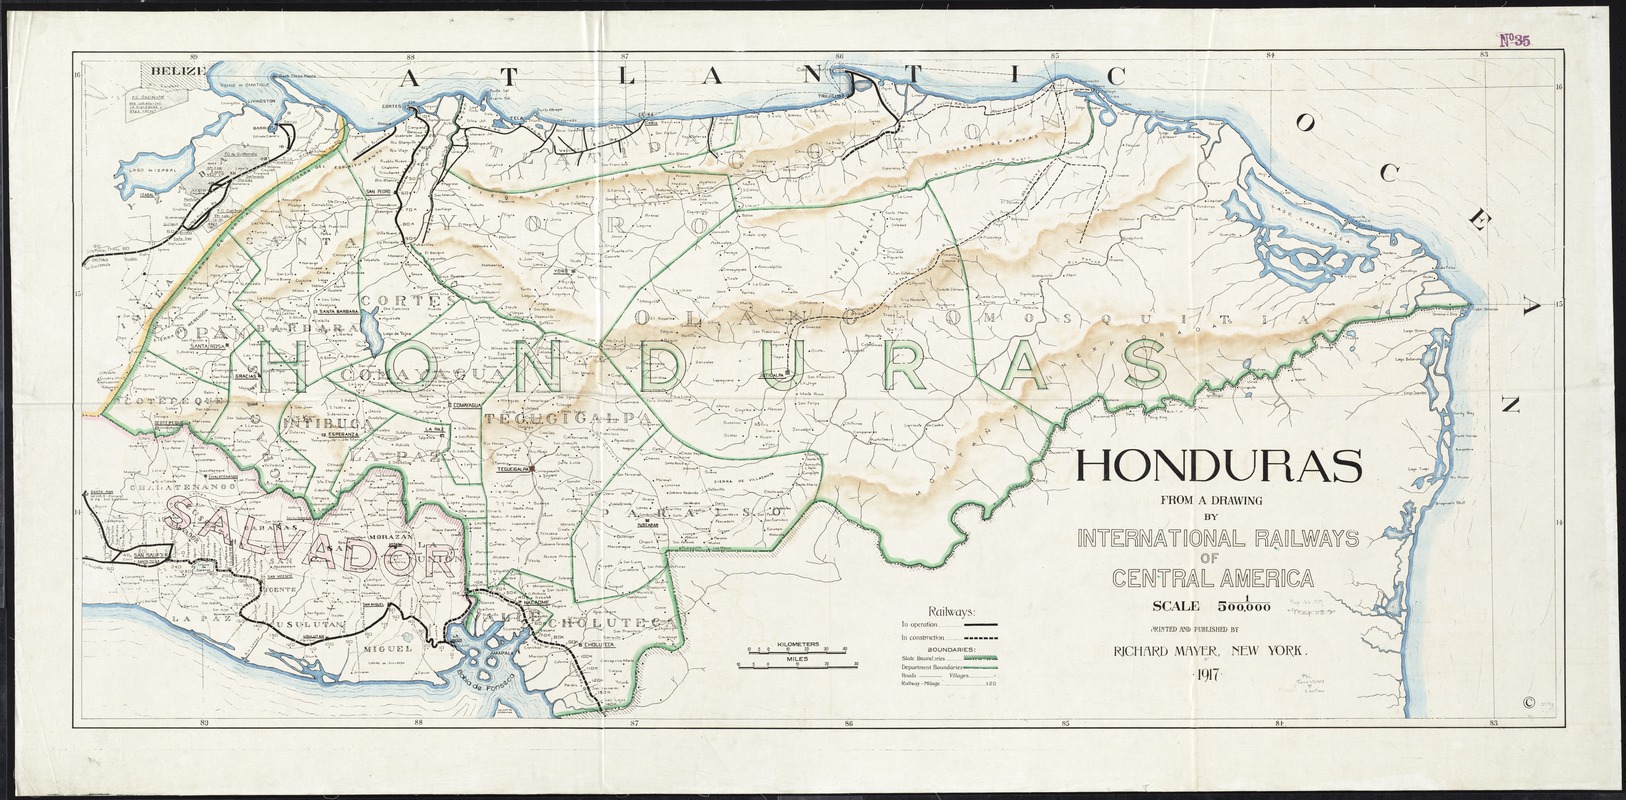 Honduras from a drawing by International Railways of Central America